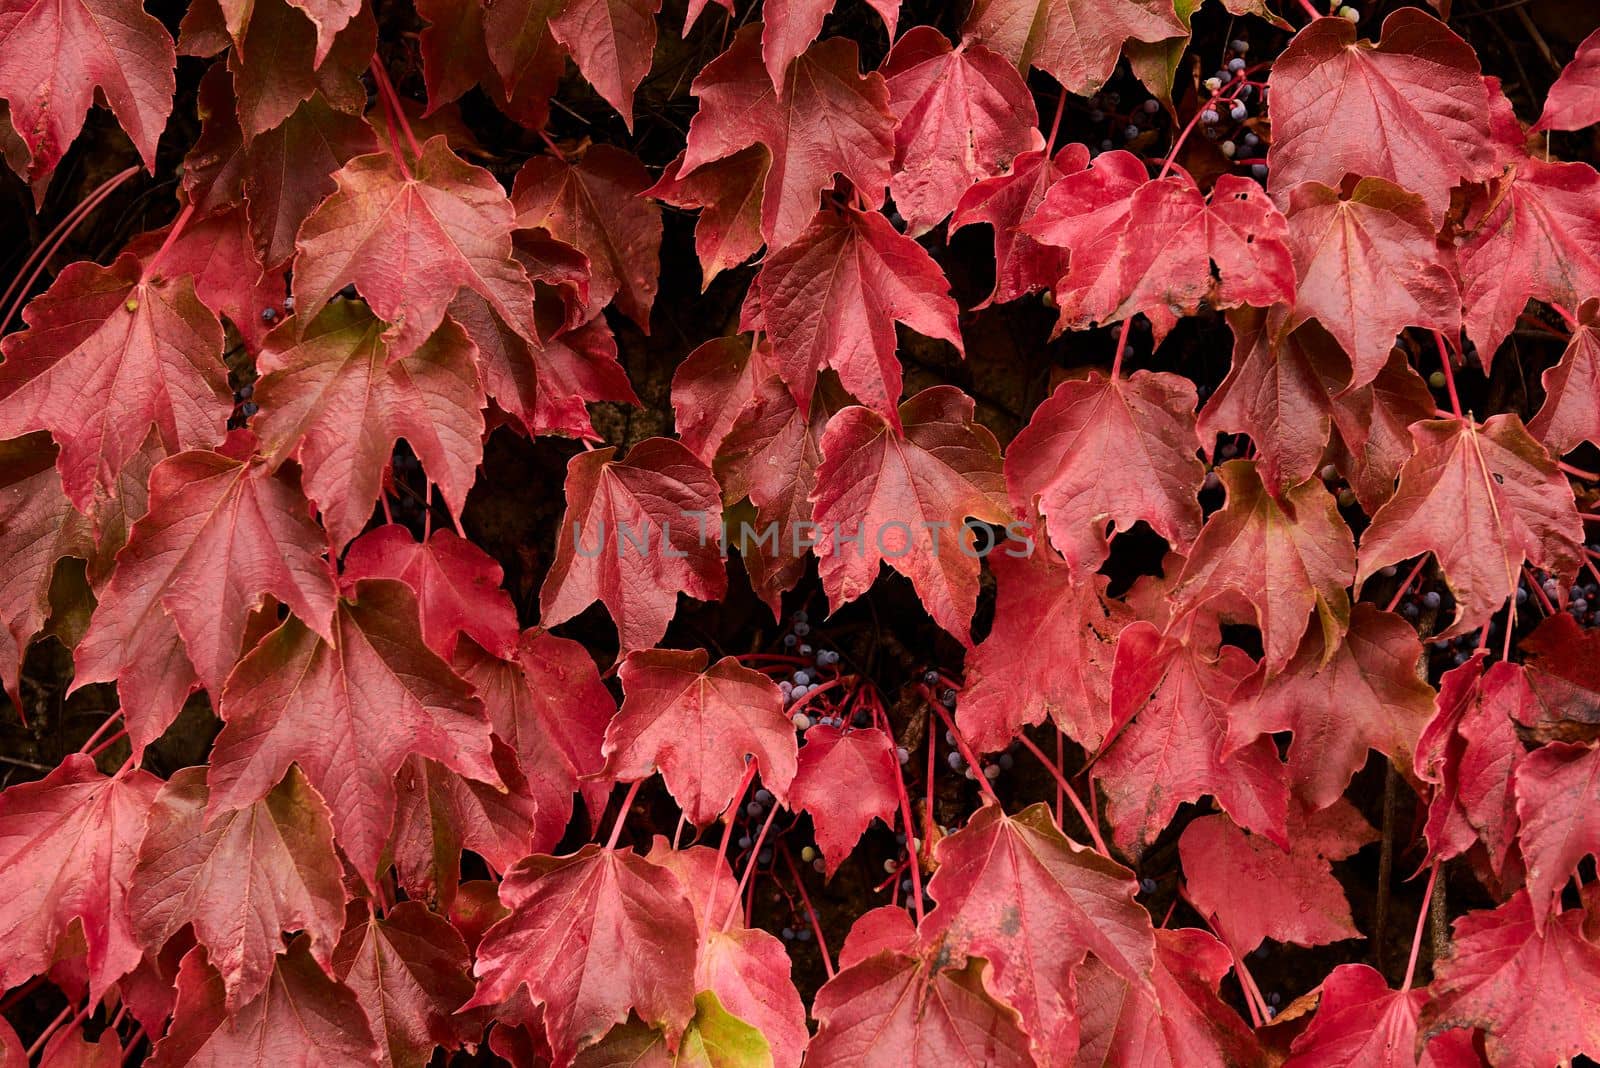 Cluster of ivy leaves and fruits in autumn. Frontal photo, and detail, autumn, wine red, spheres, branches green